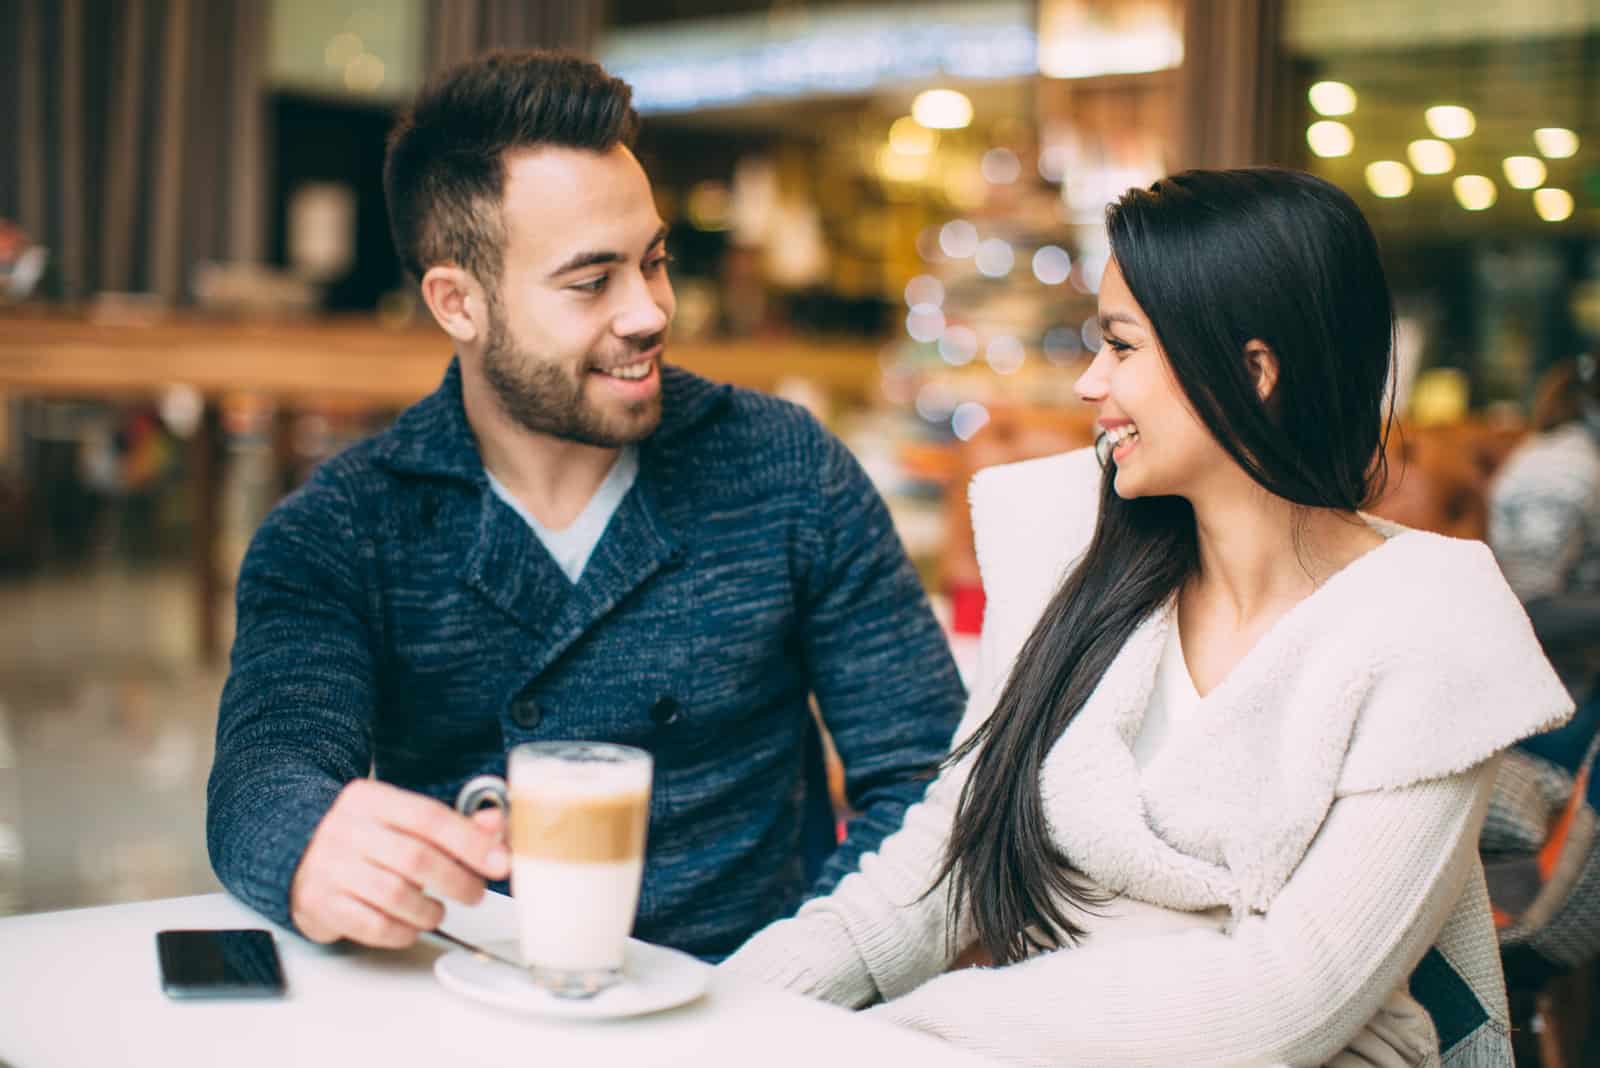 a smiling woman with long black hair is sitting in a cafe with a man